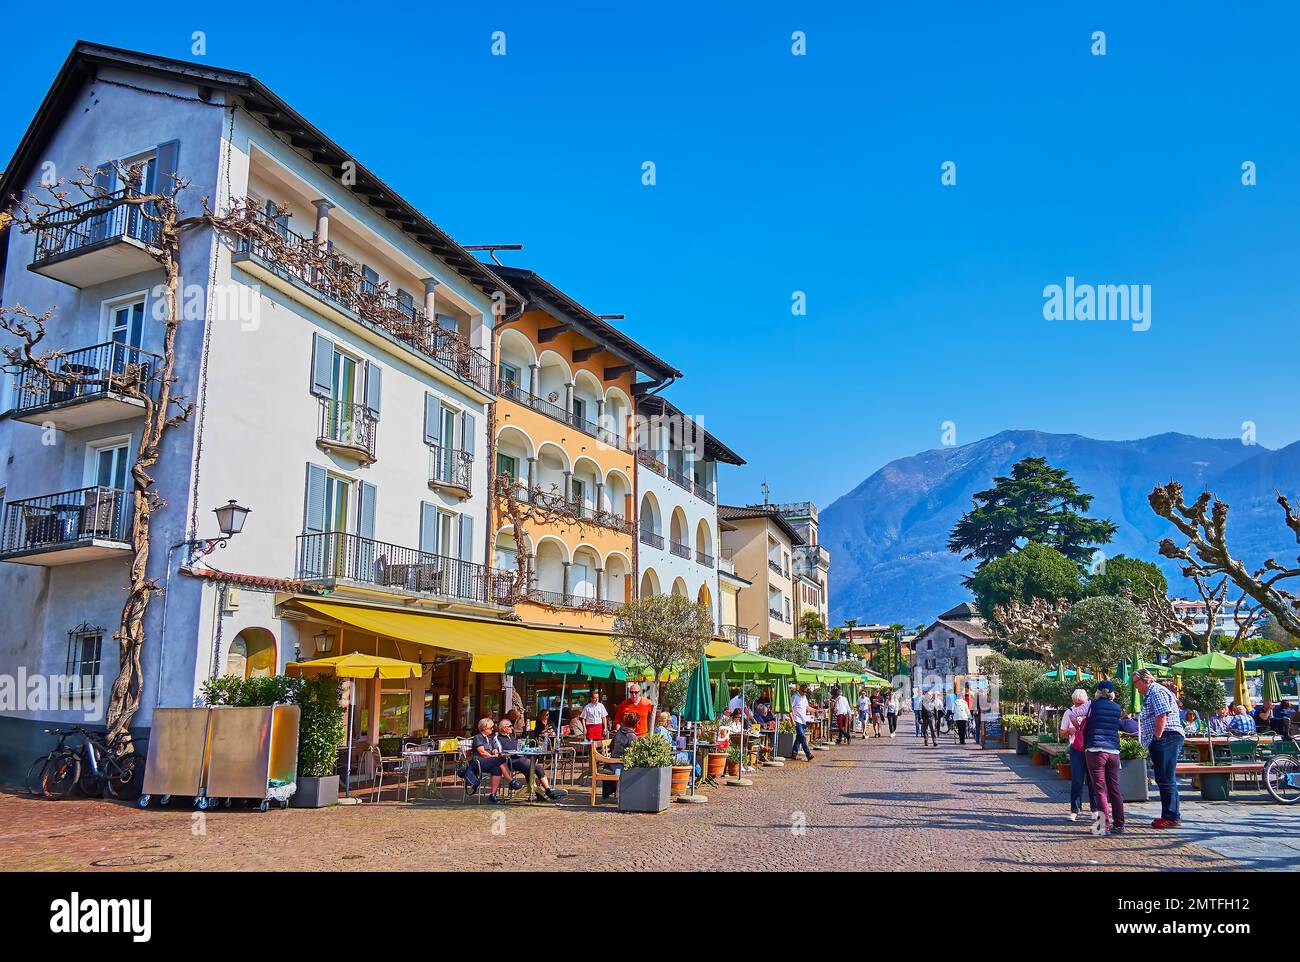 ASCONA, SWITZERLAND - MARCH 28, 2022: The dense housing on Piazza Giuseppe Motta with beautiful terraces, decorated with green plants and flowers in p Stock Photo